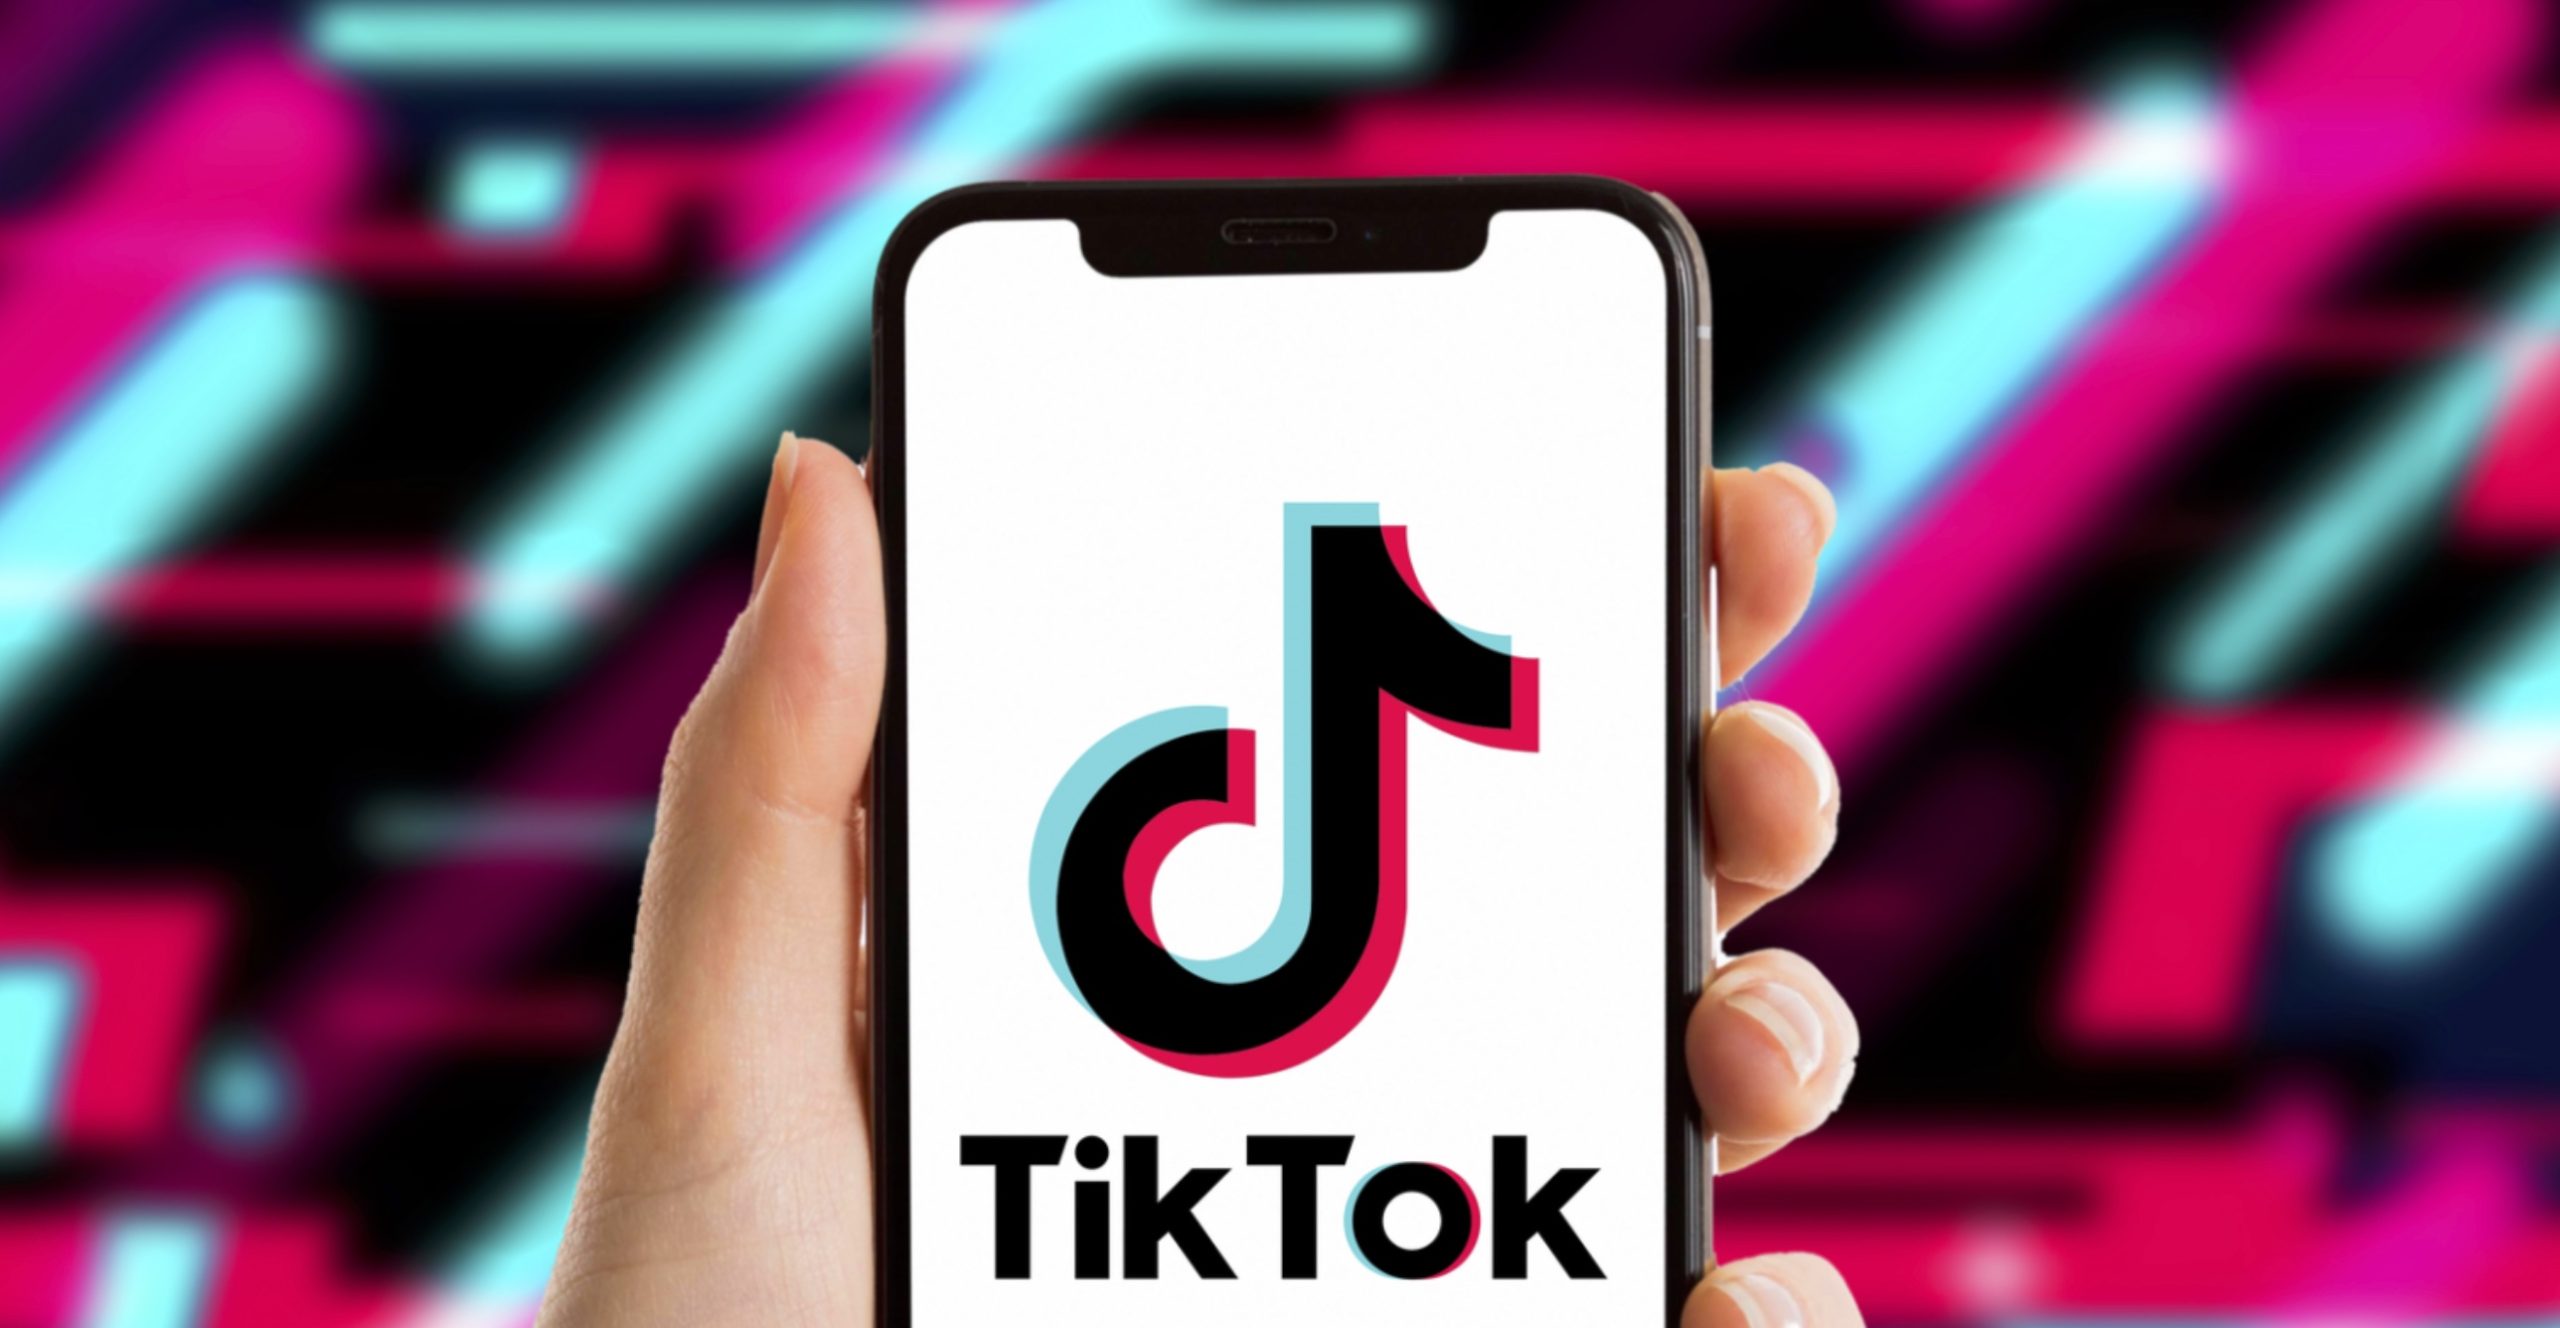 TikTok renounces reports of its sensitive user data and source code being leaked by hackers